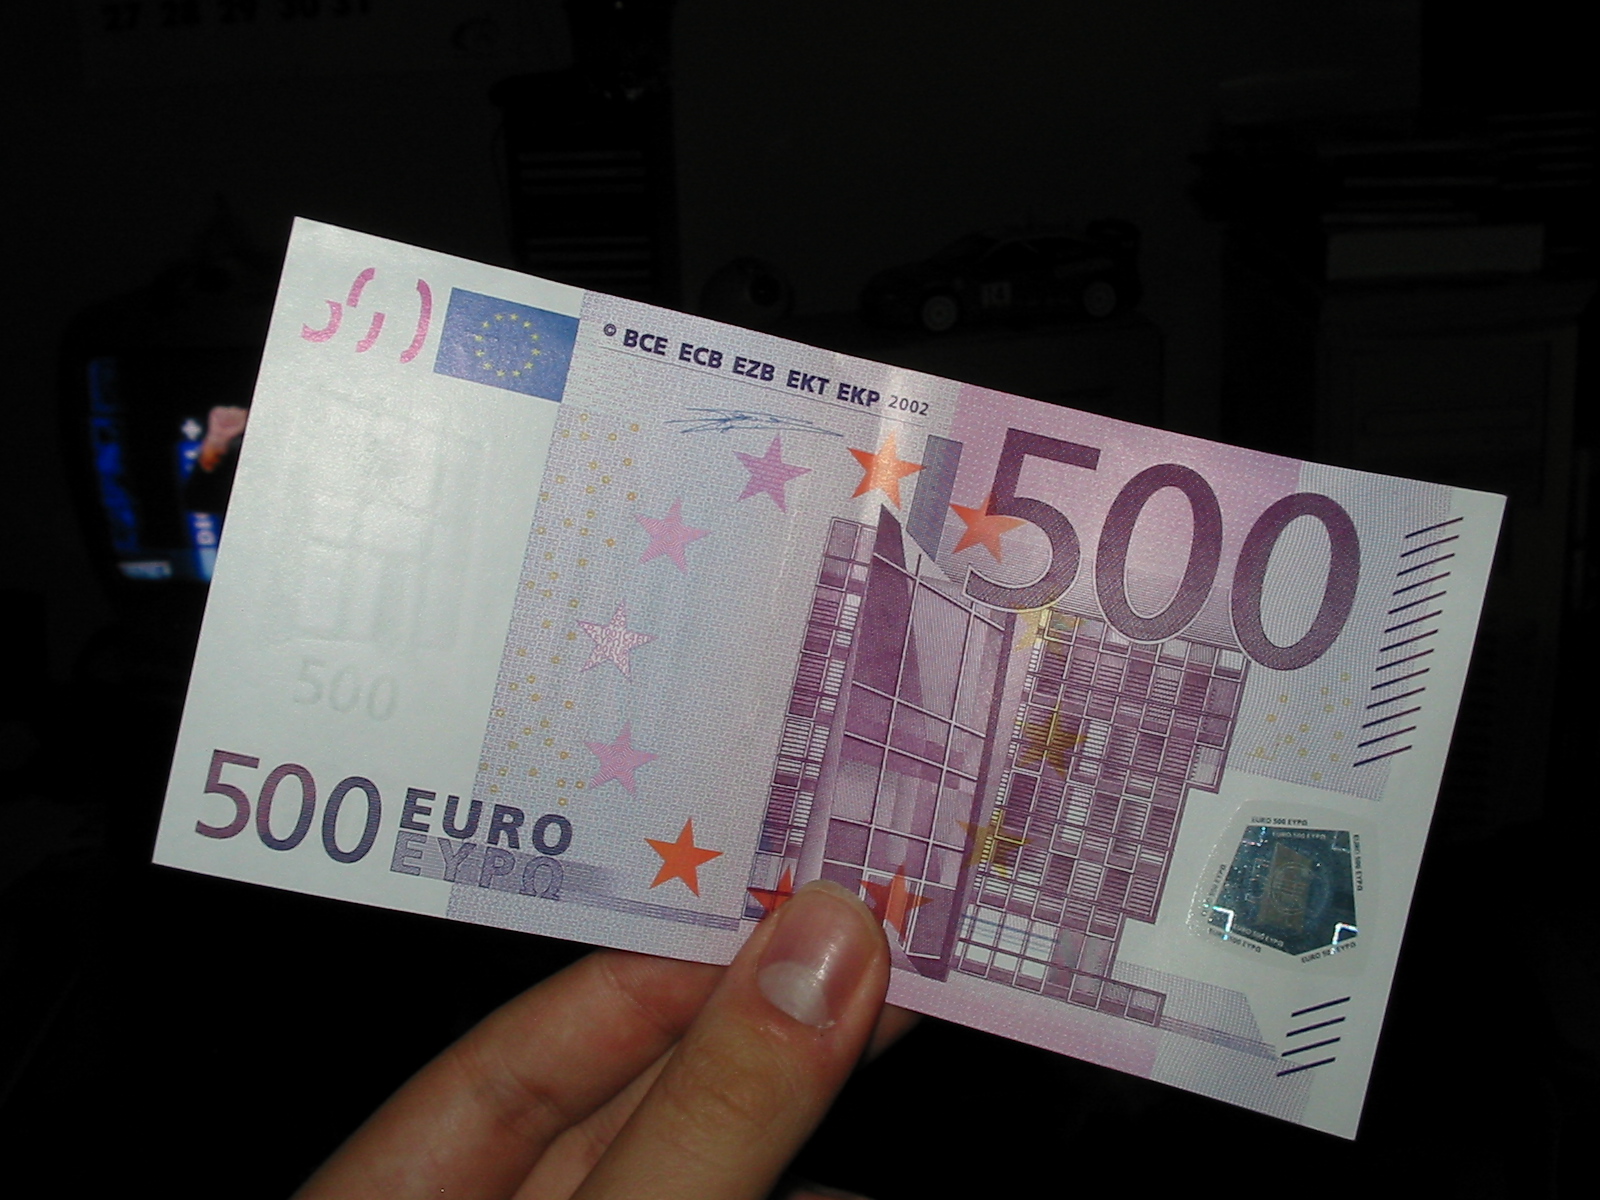 One quarter of all 500 euro notes are recorded in Spain since its launch in 2002.